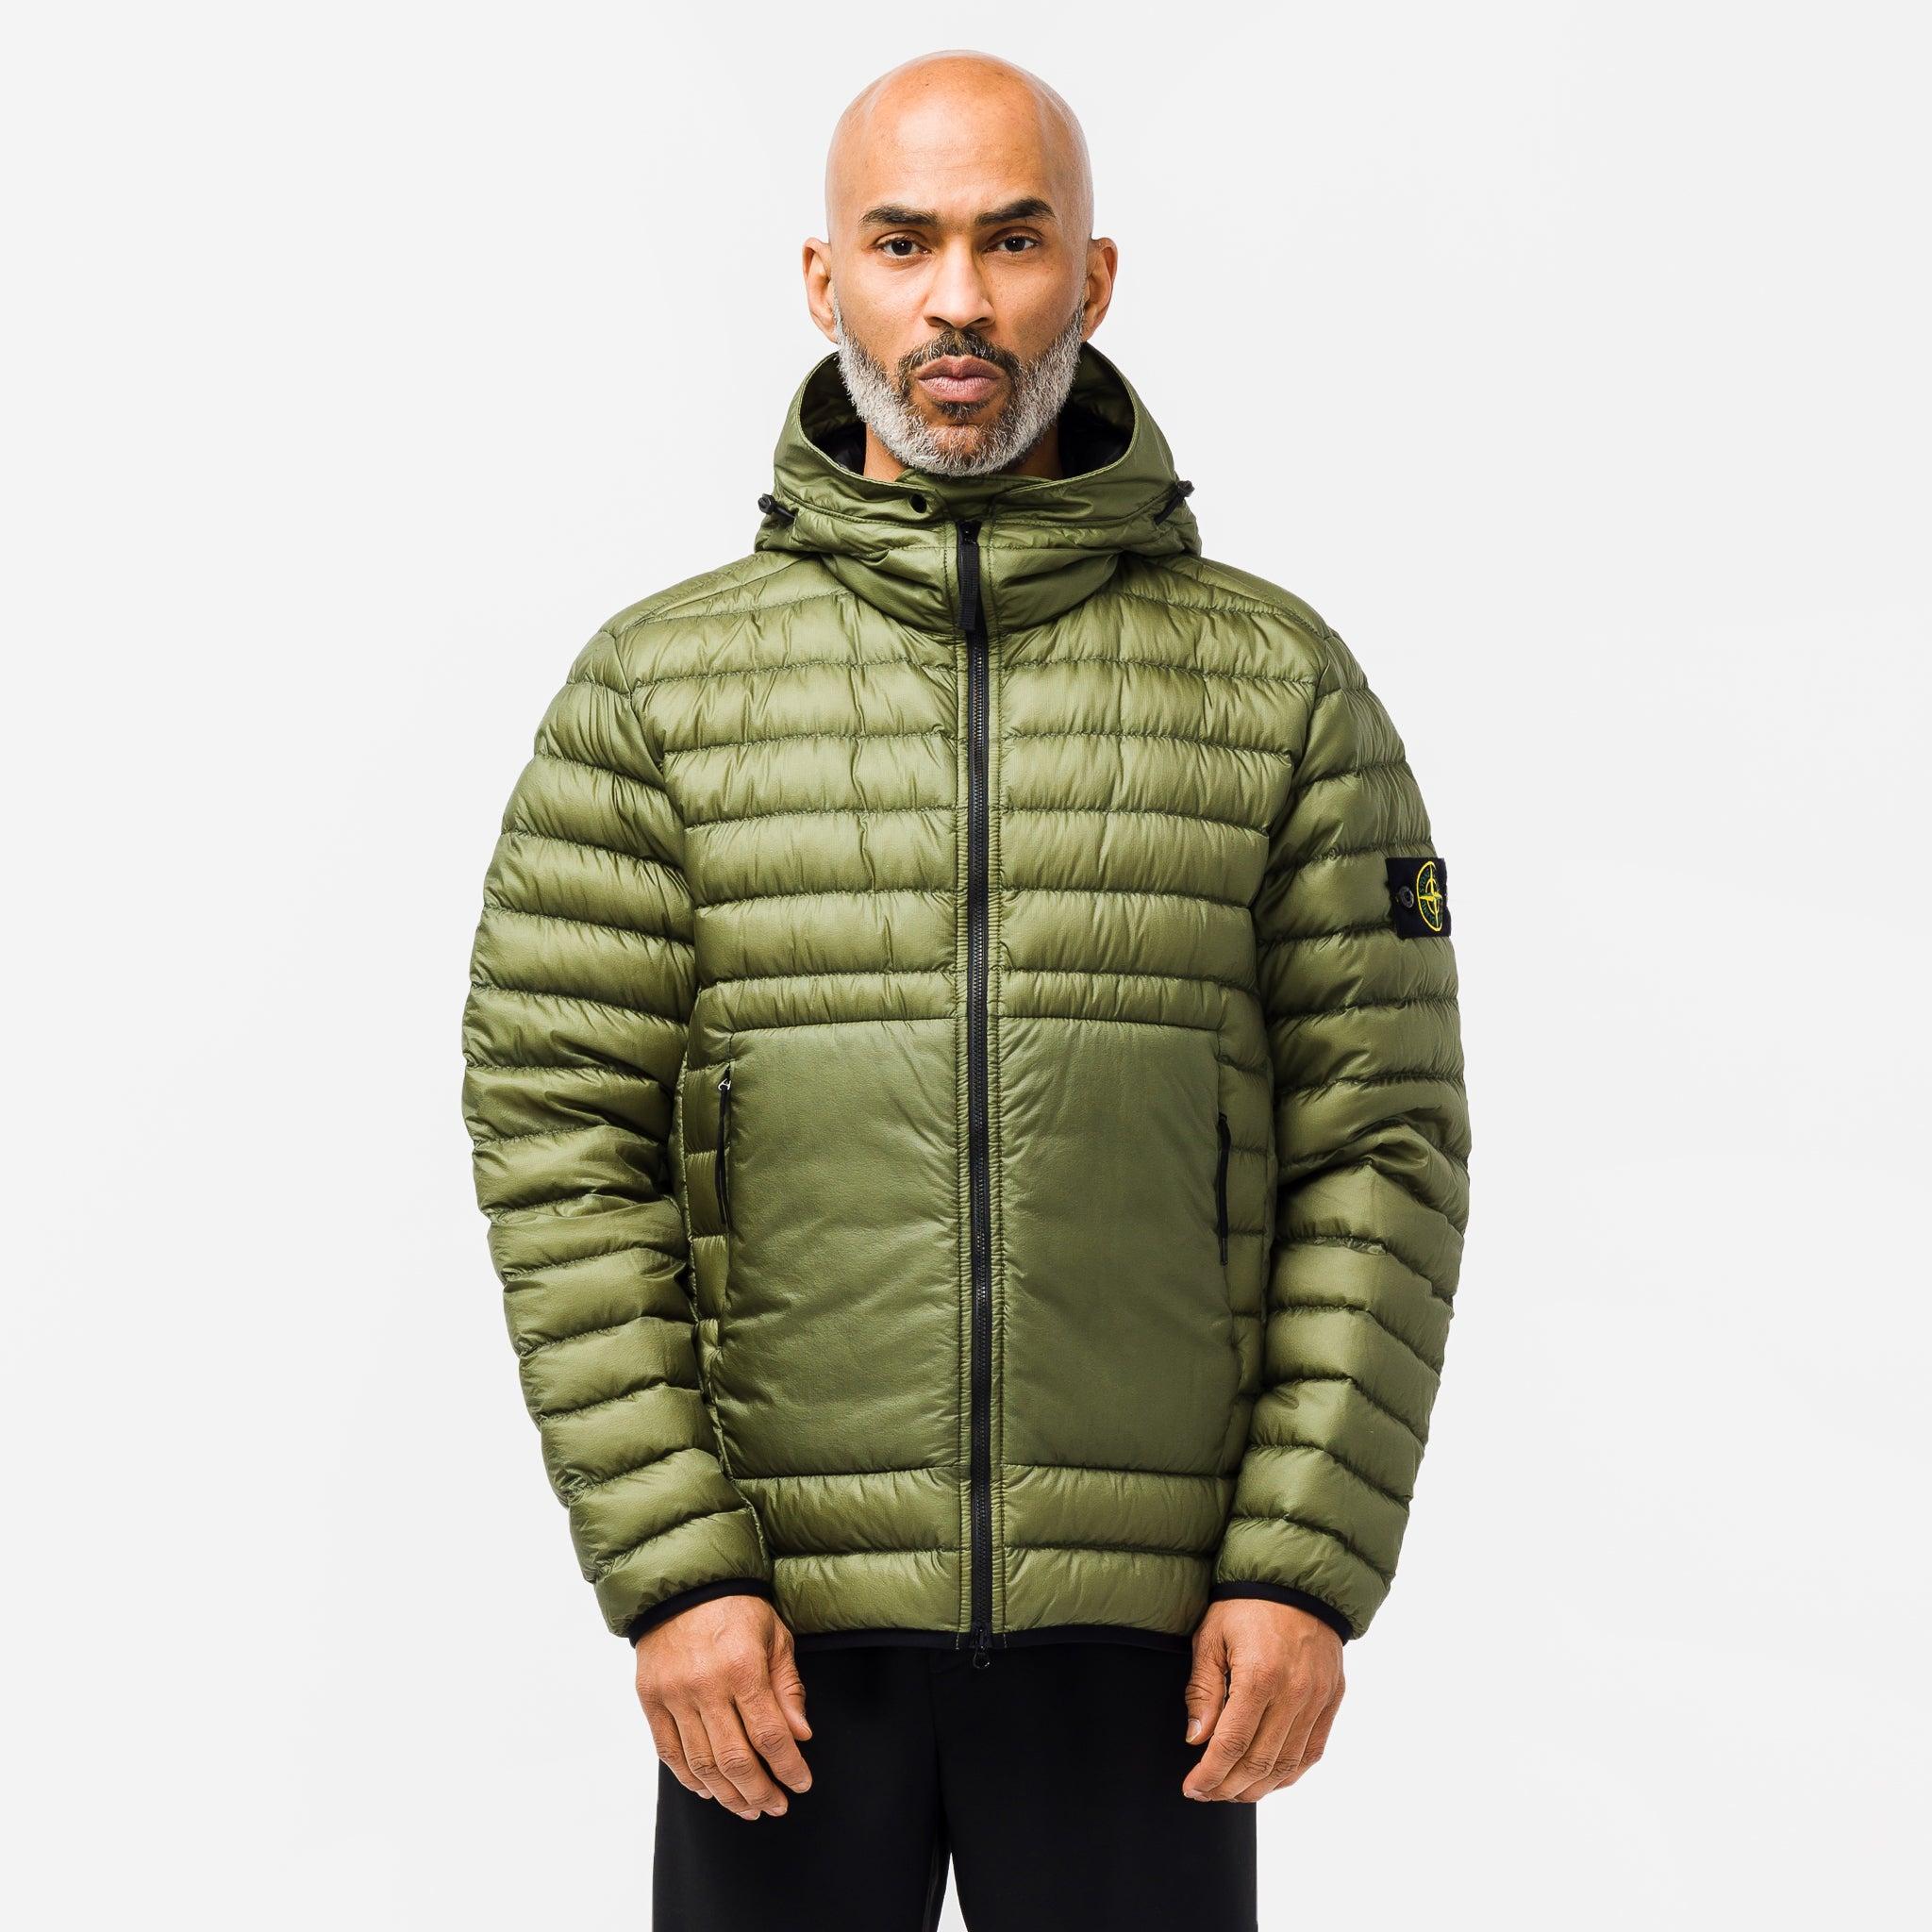 Stone Island Synthetic 40324 Bio Based Ripstop Nylon Down Jacket in Olive  (Green) for Men | Lyst